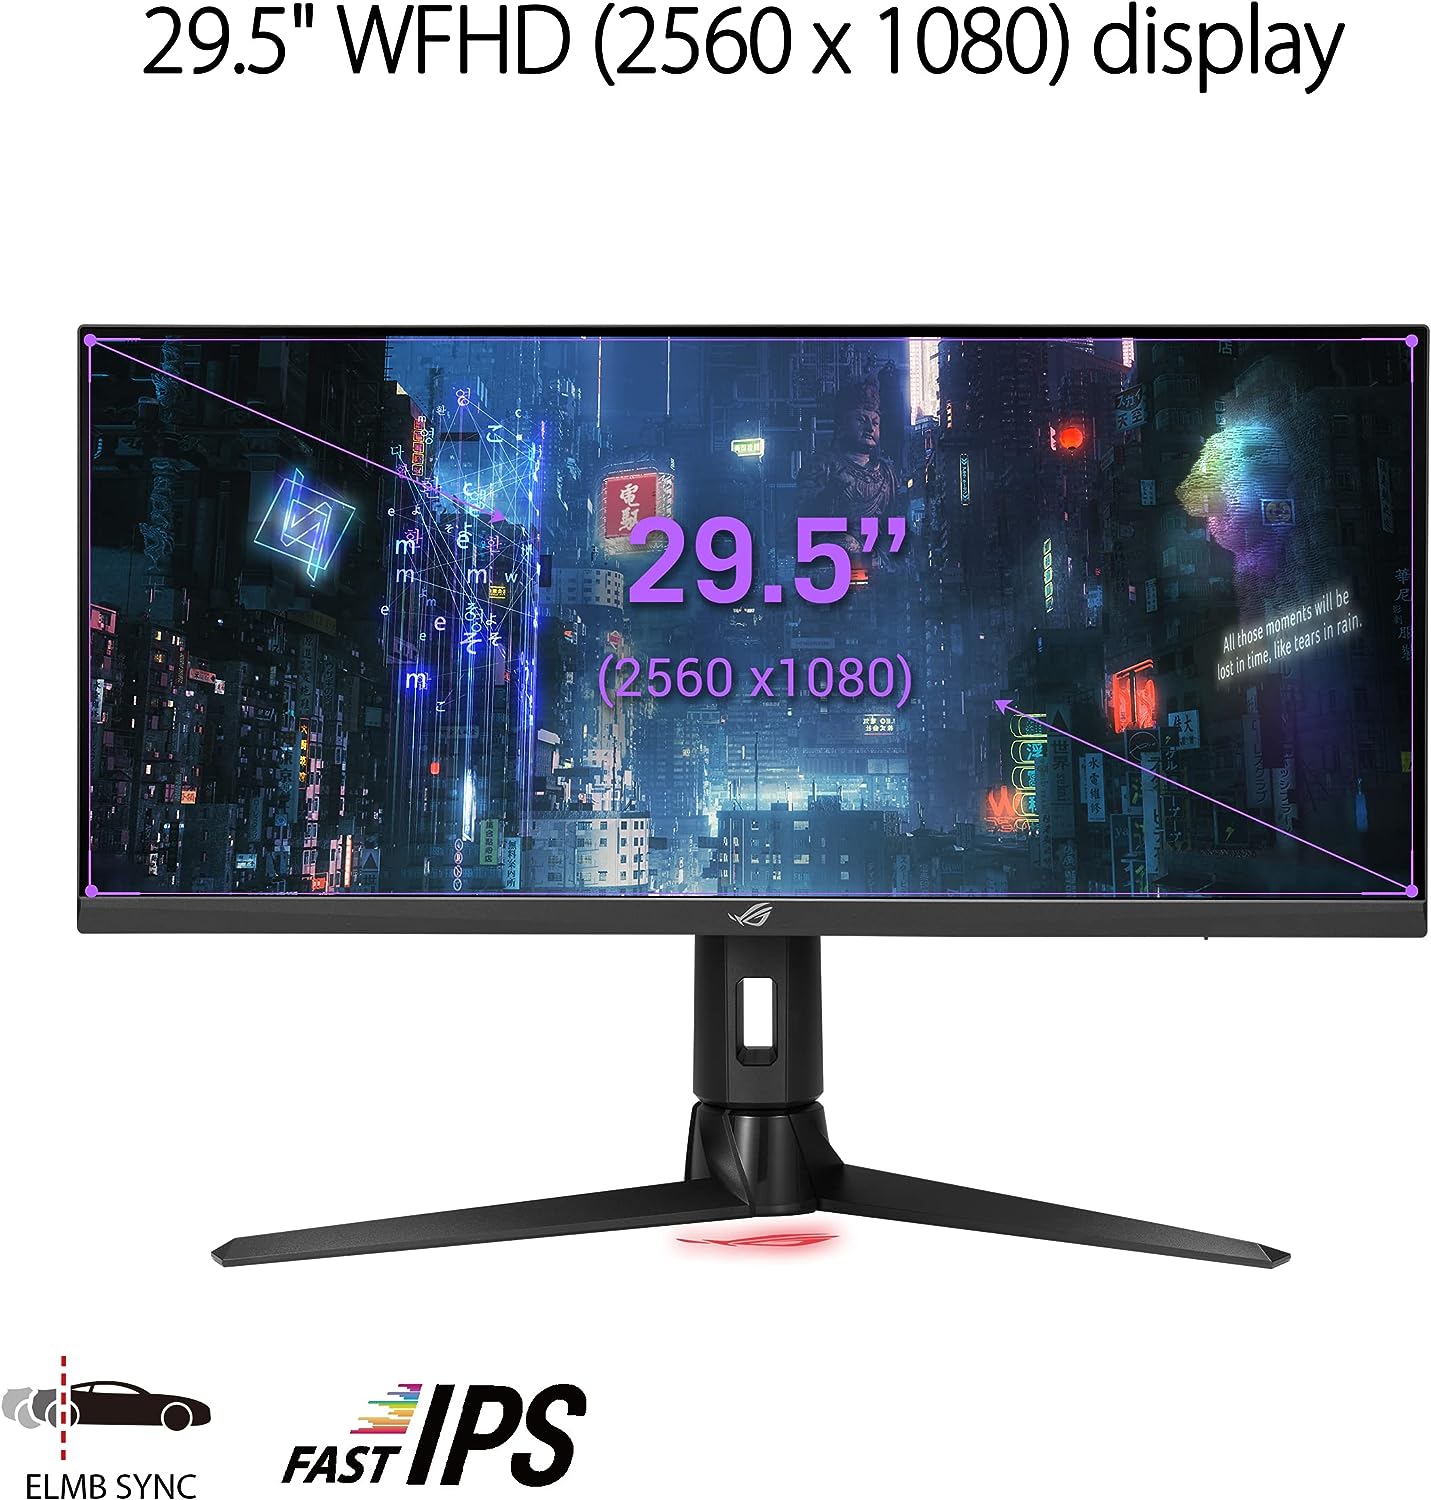 Immersive 29.5 HDR Gaming Monitor - Fast IPS, 220Hz, 1ms Response Time 0195553462945